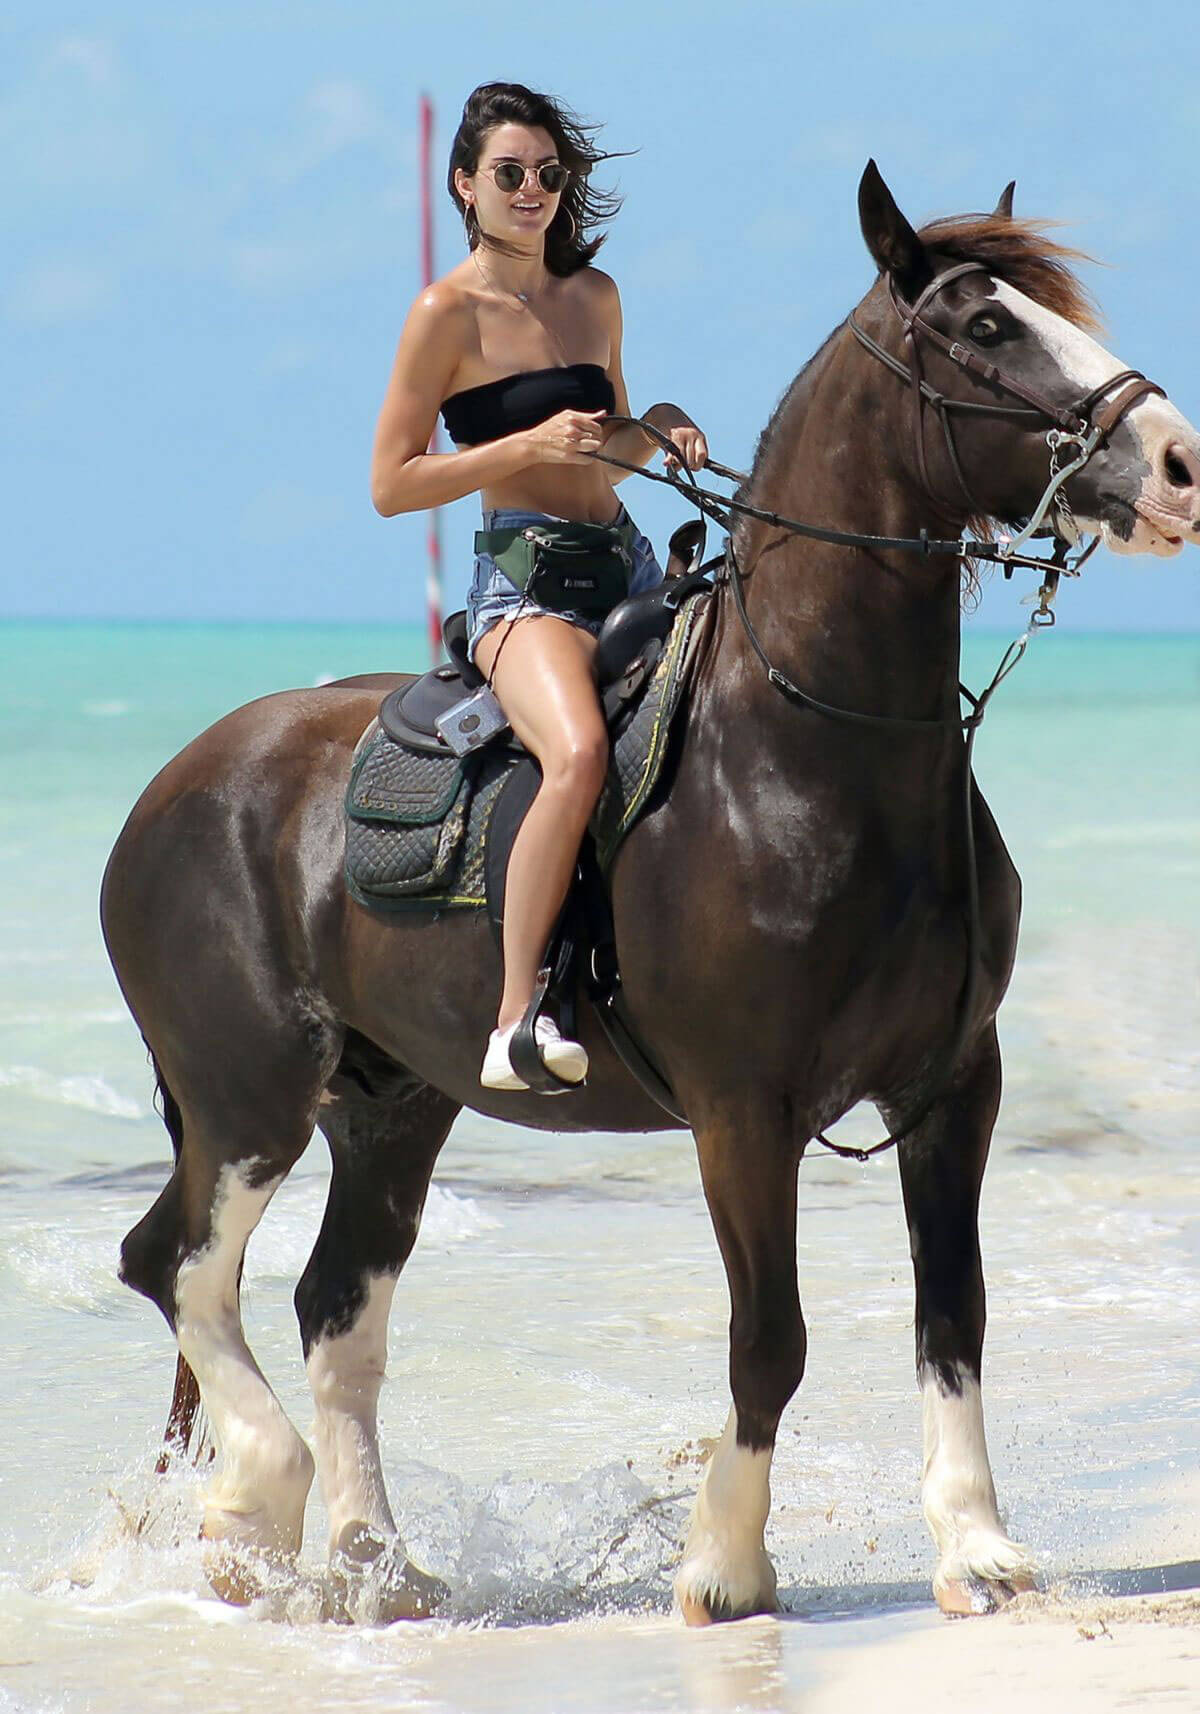 Kendall Jenner at Horseback Riding at a Beach in Turks - 15/09/2016